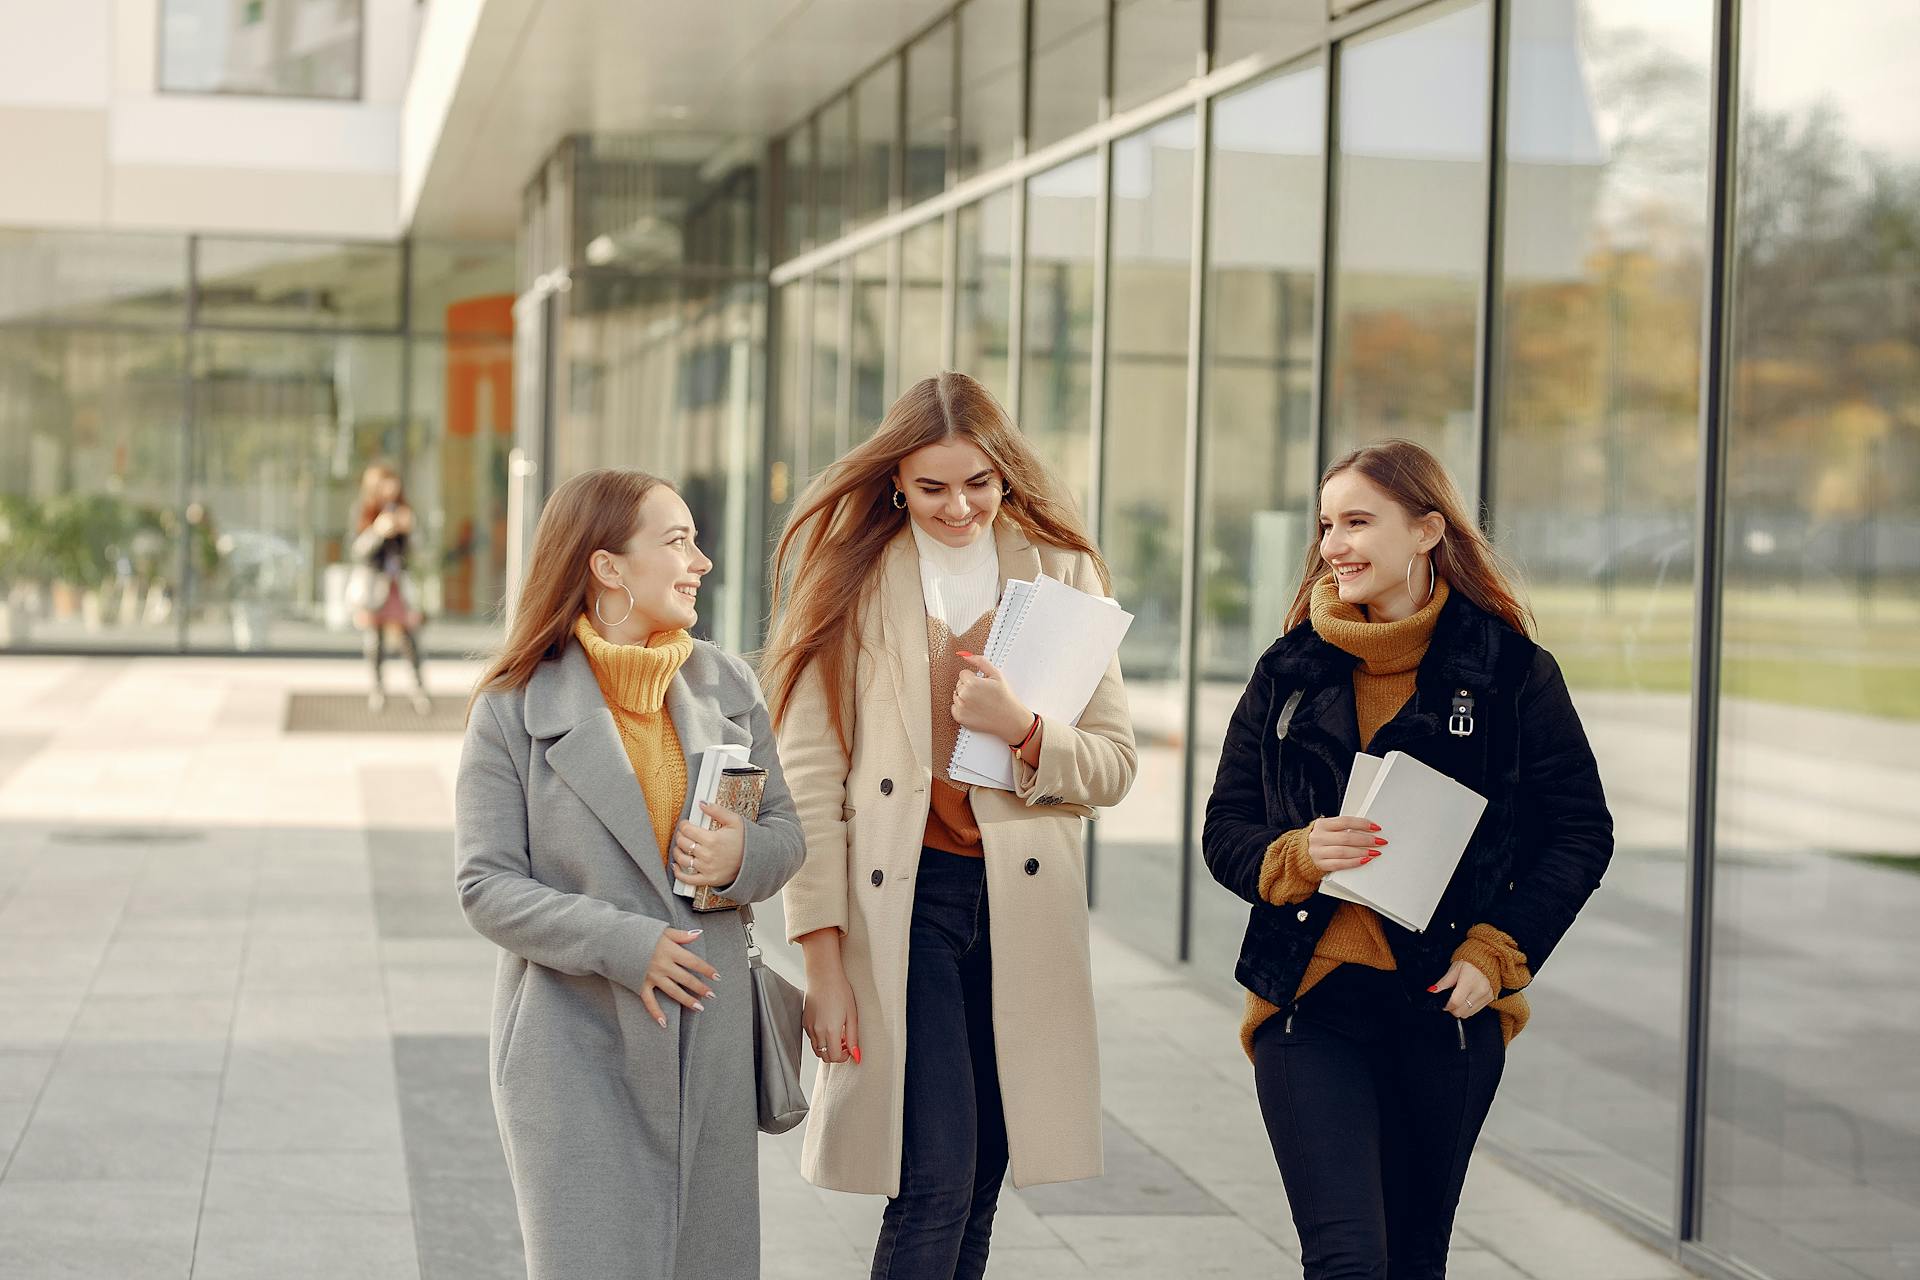 Three female students smiling while discussing their day in college | Source: Pexels